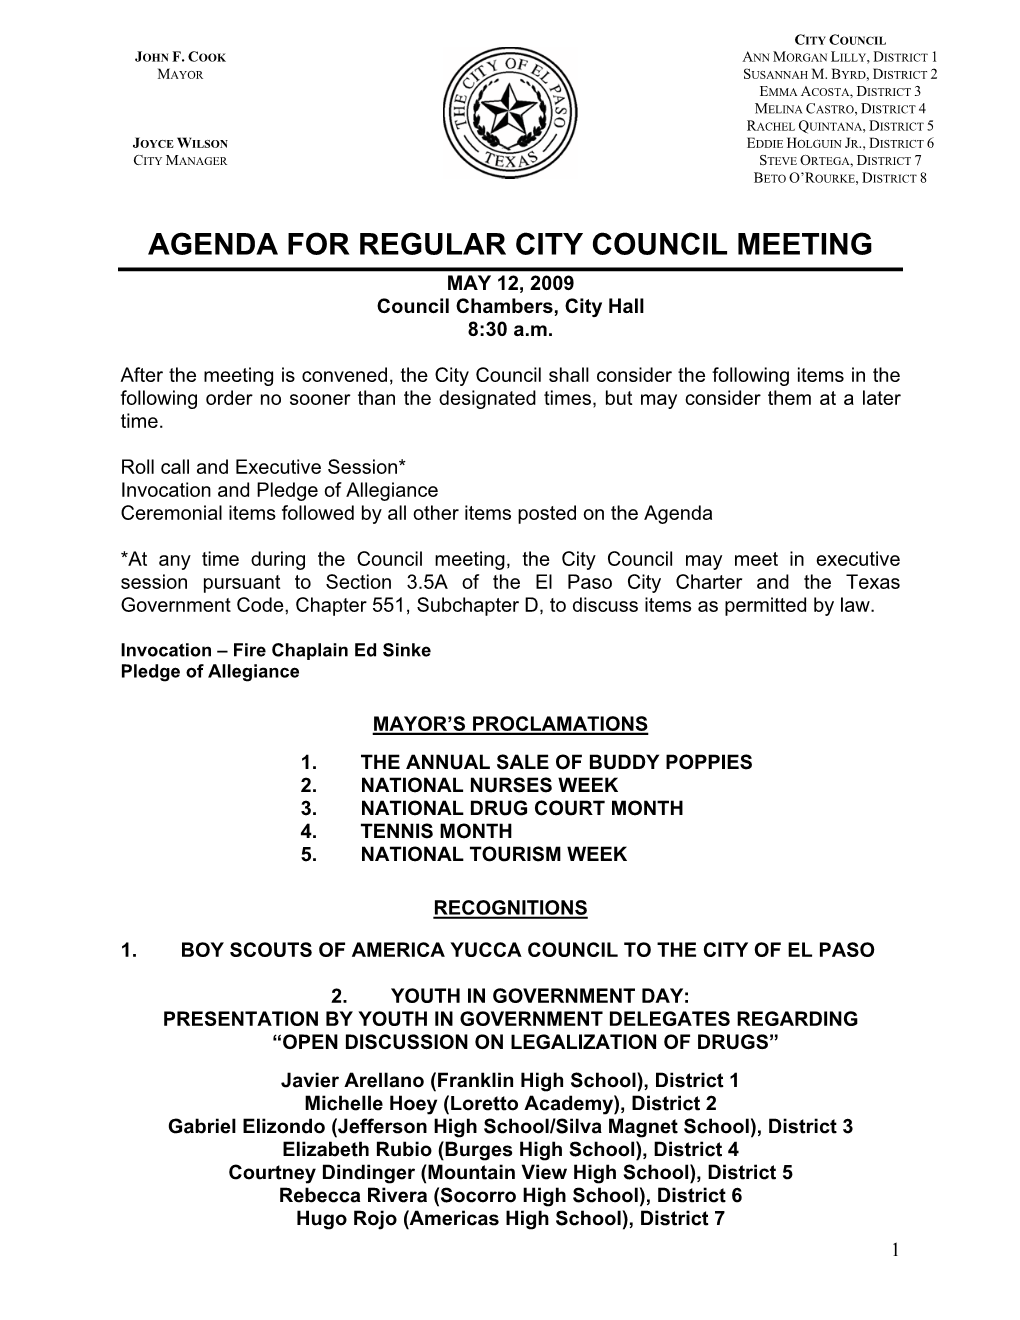 AGENDA for REGULAR CITY COUNCIL MEETING MAY 12, 2009 Council Chambers, City Hall 8:30 A.M